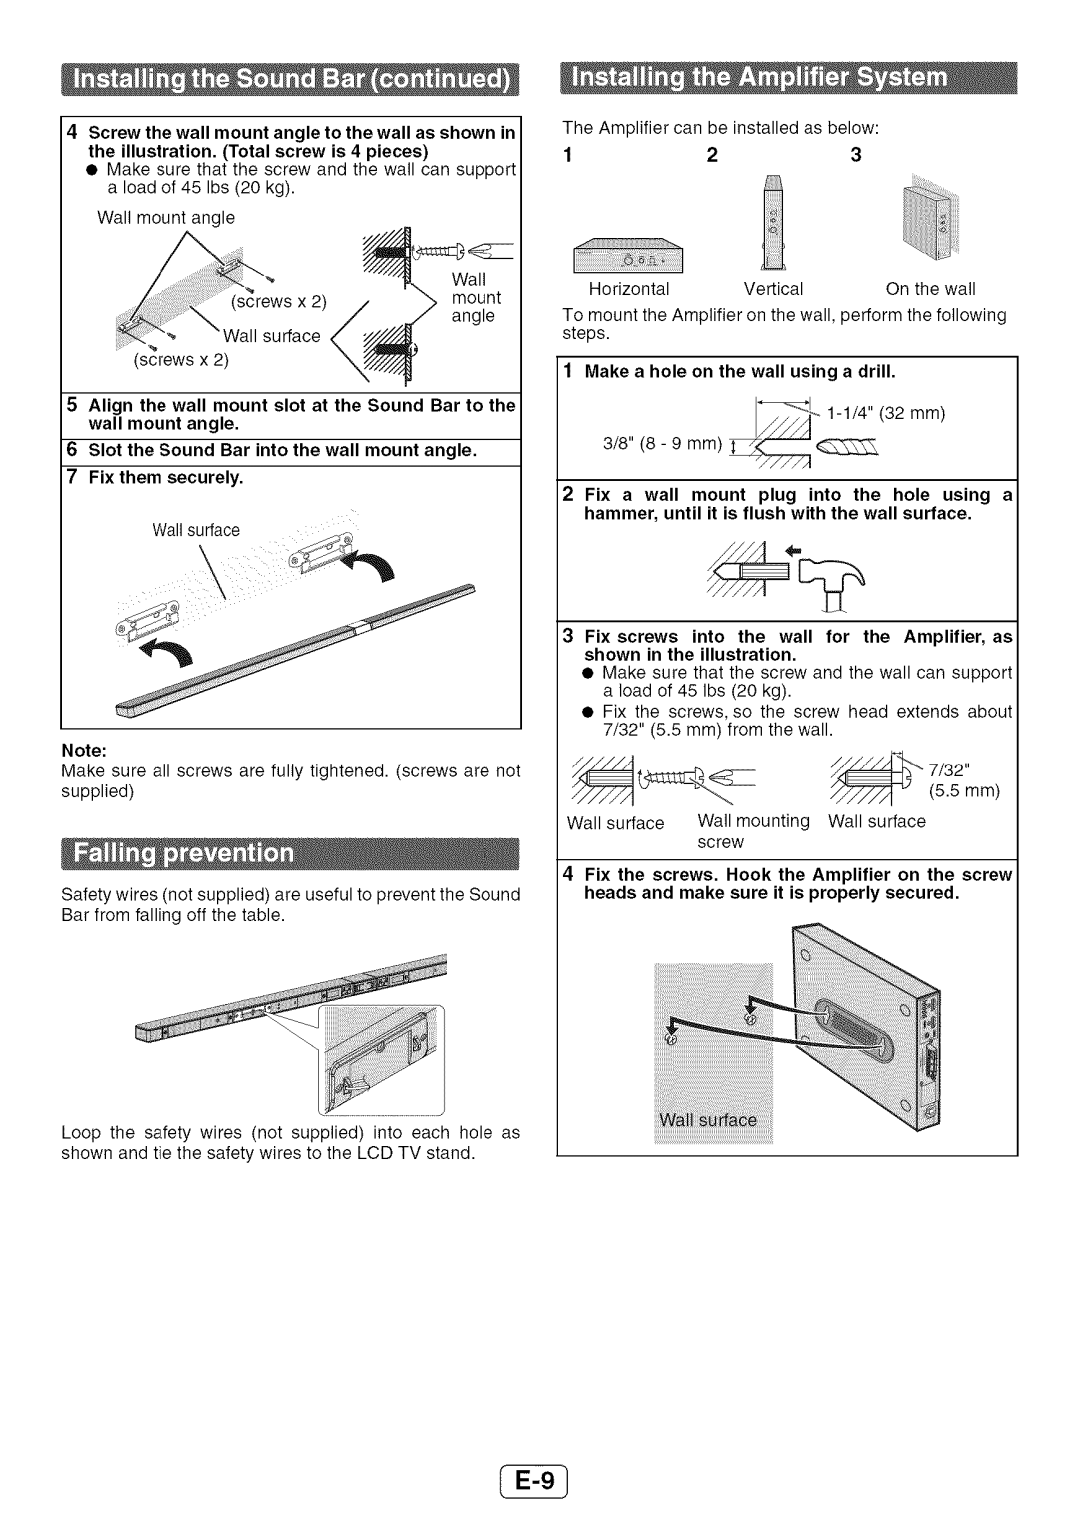 Sharp HT-SL72 operation manual The Amplifier can be installed as below 